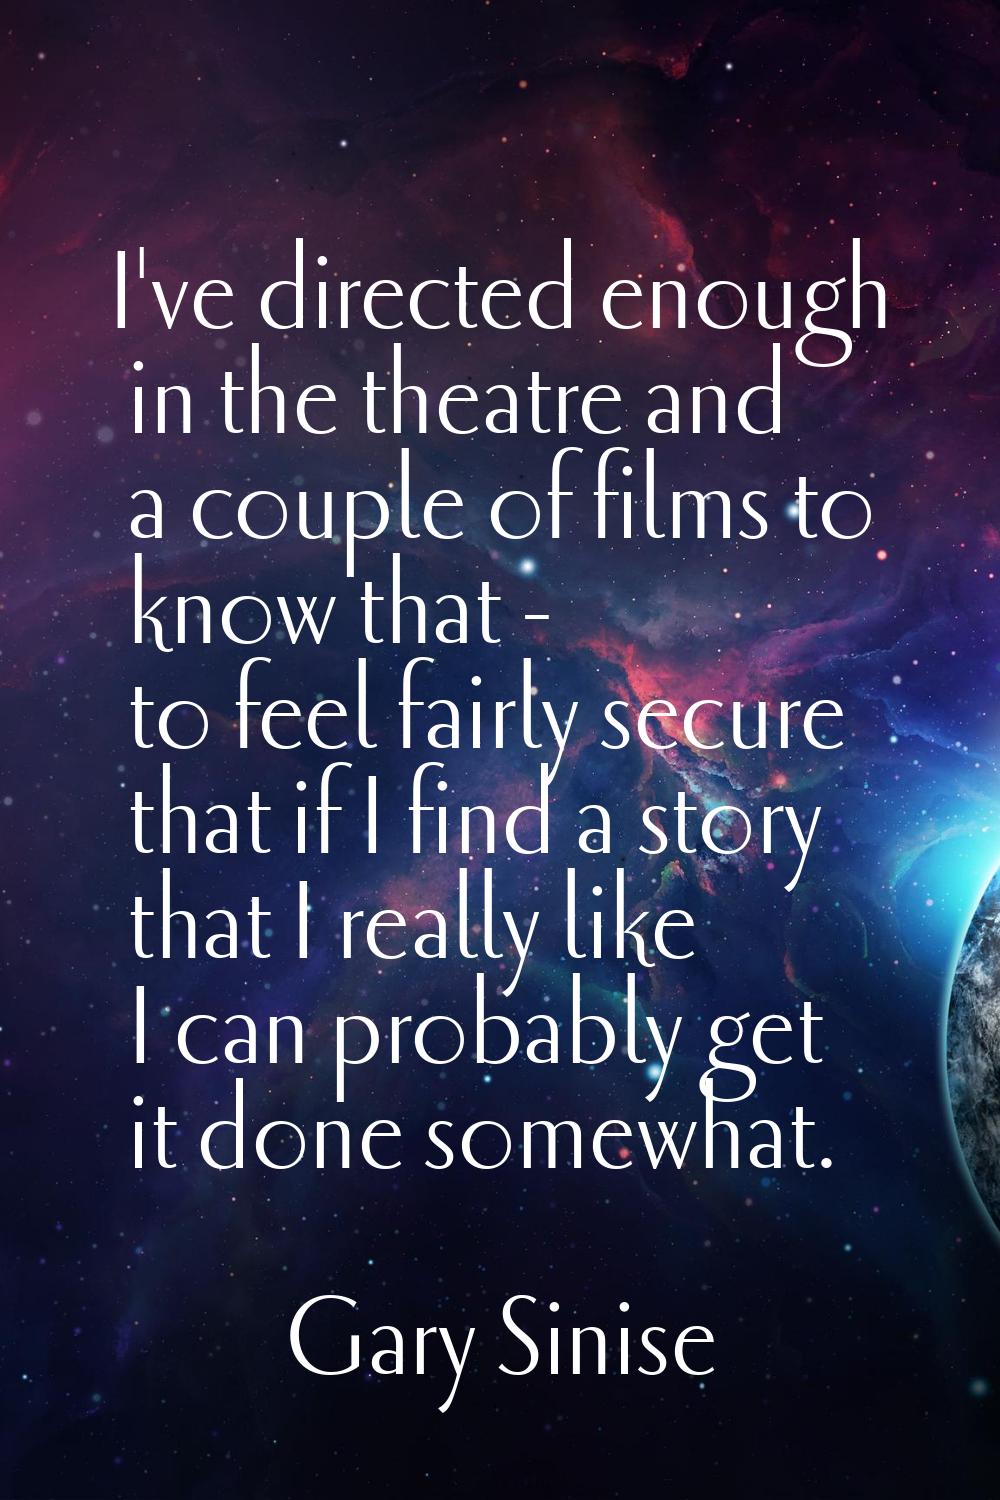 I've directed enough in the theatre and a couple of films to know that - to feel fairly secure that